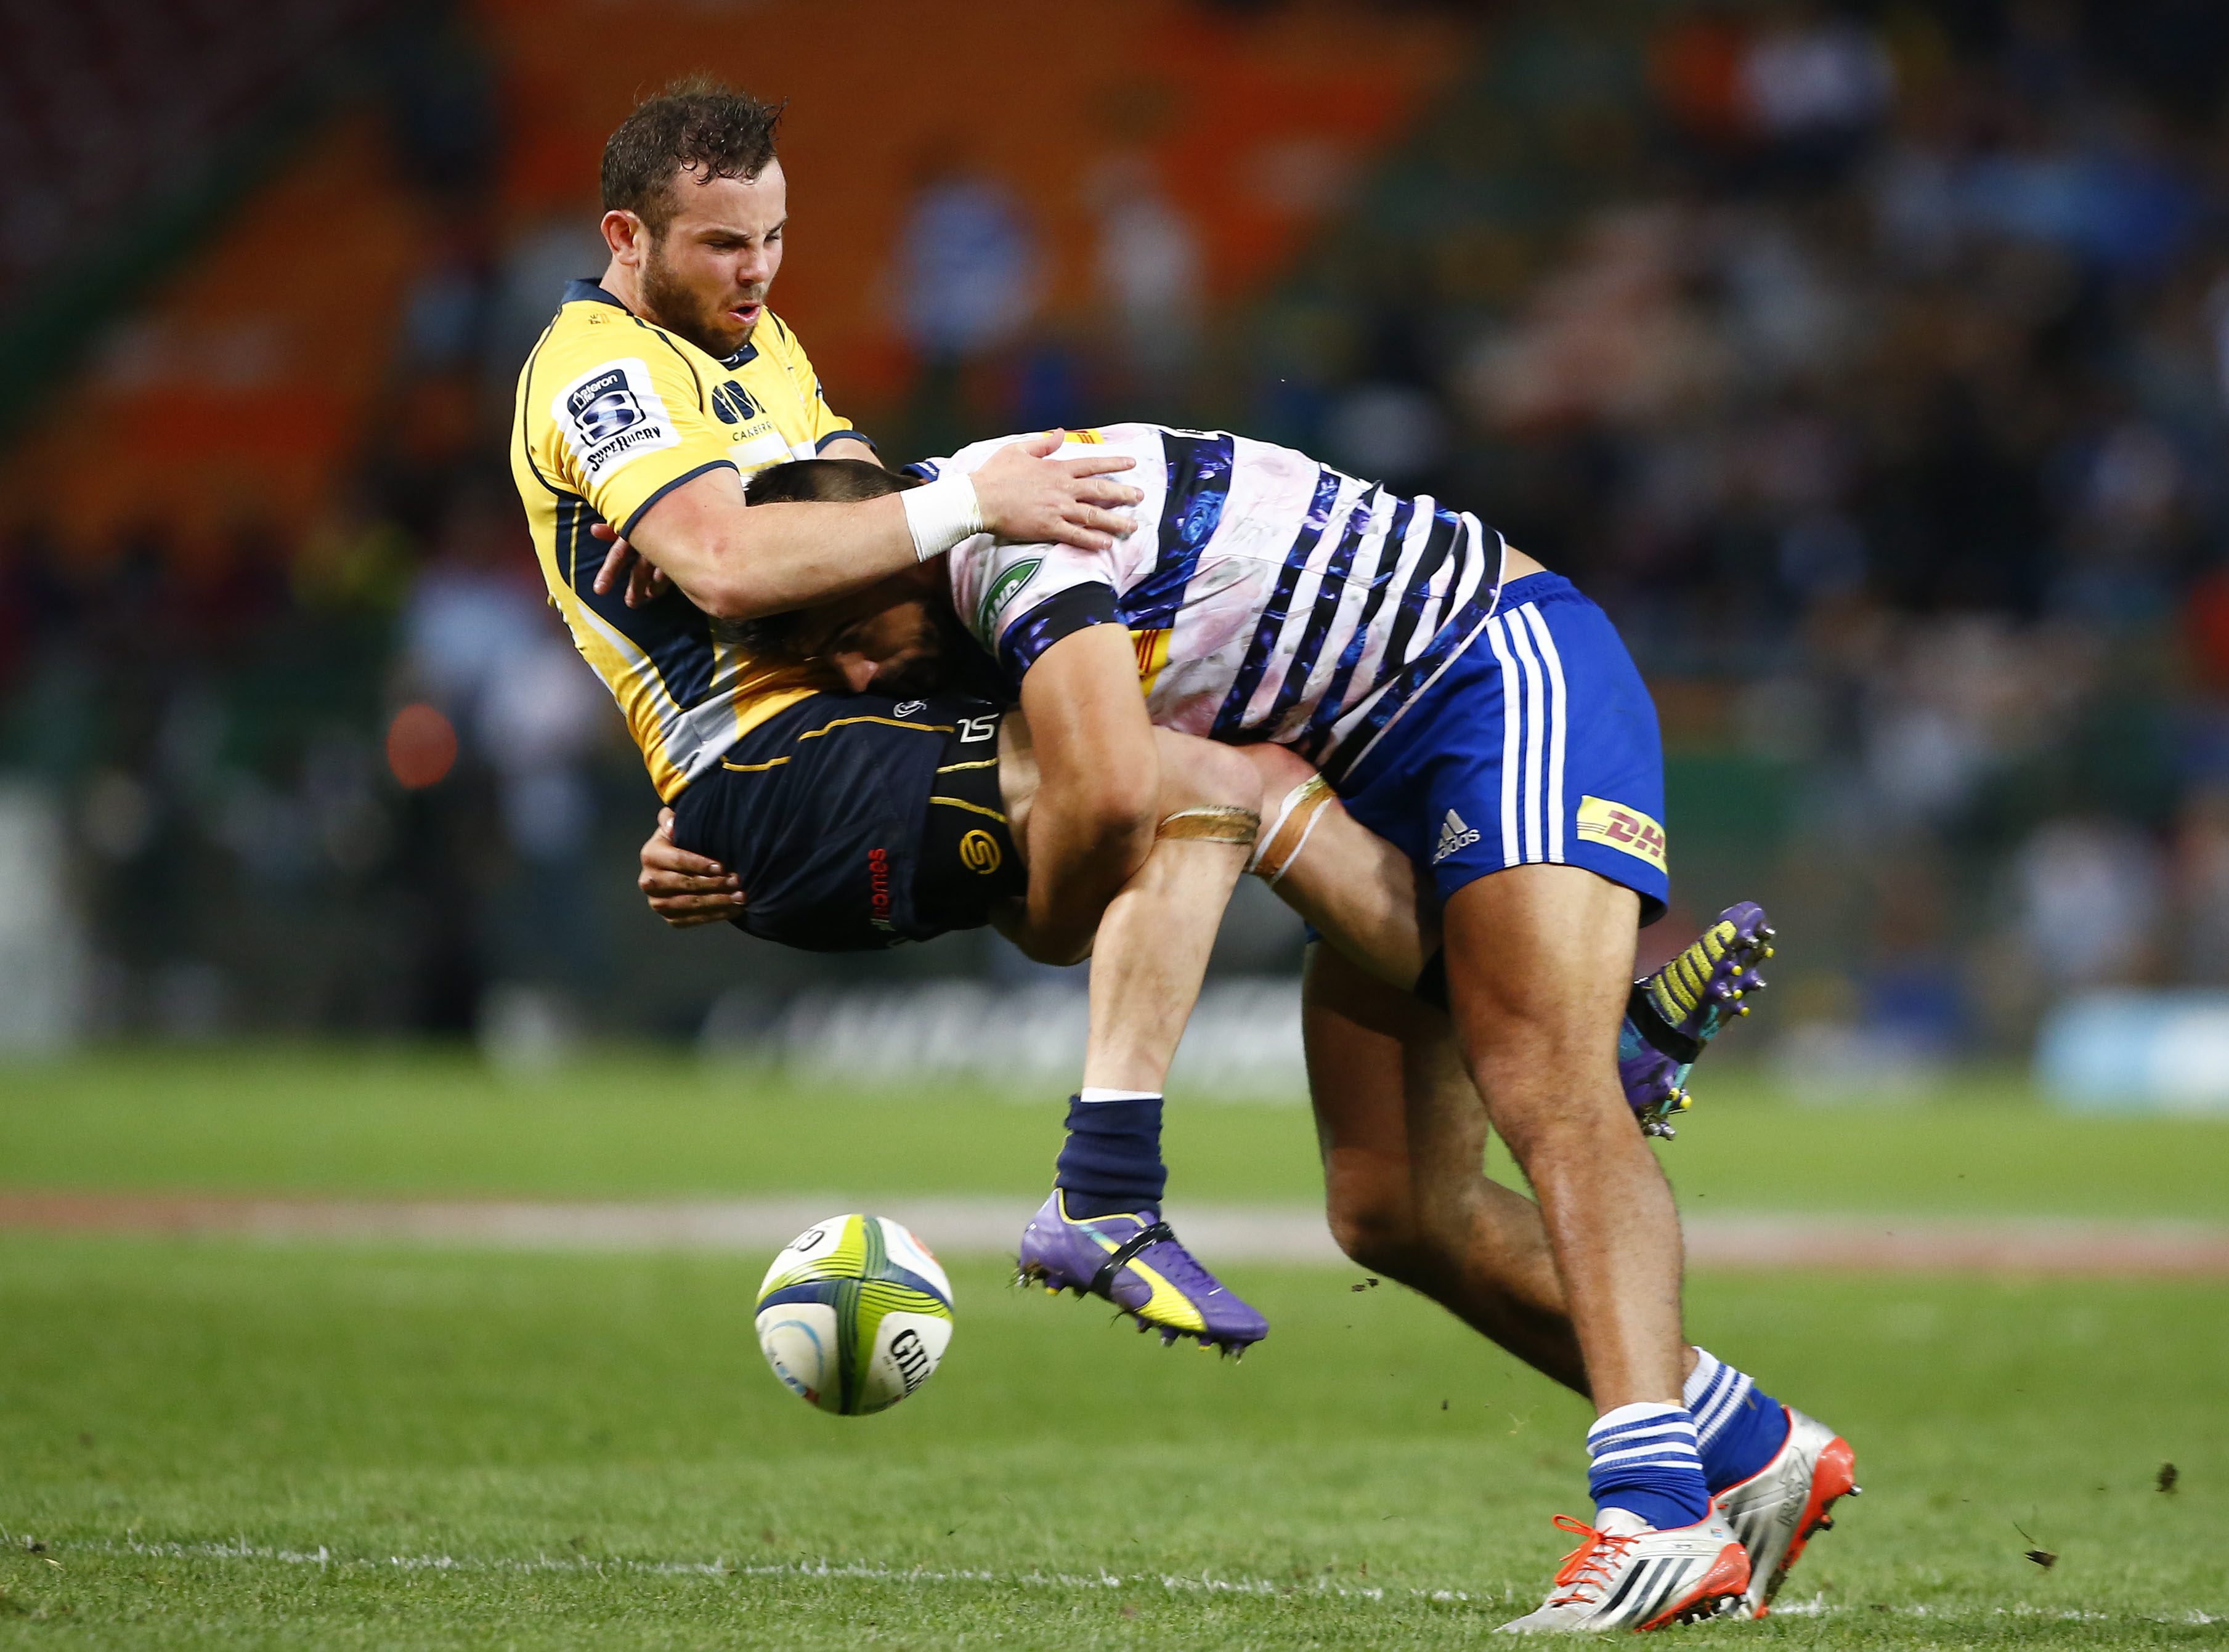 Damian de Allende of the Stormers (right) tackles Robbie Coleman of the Brumbies during their Super Rugby match at Newlands in Cape Town. Photos: EPA